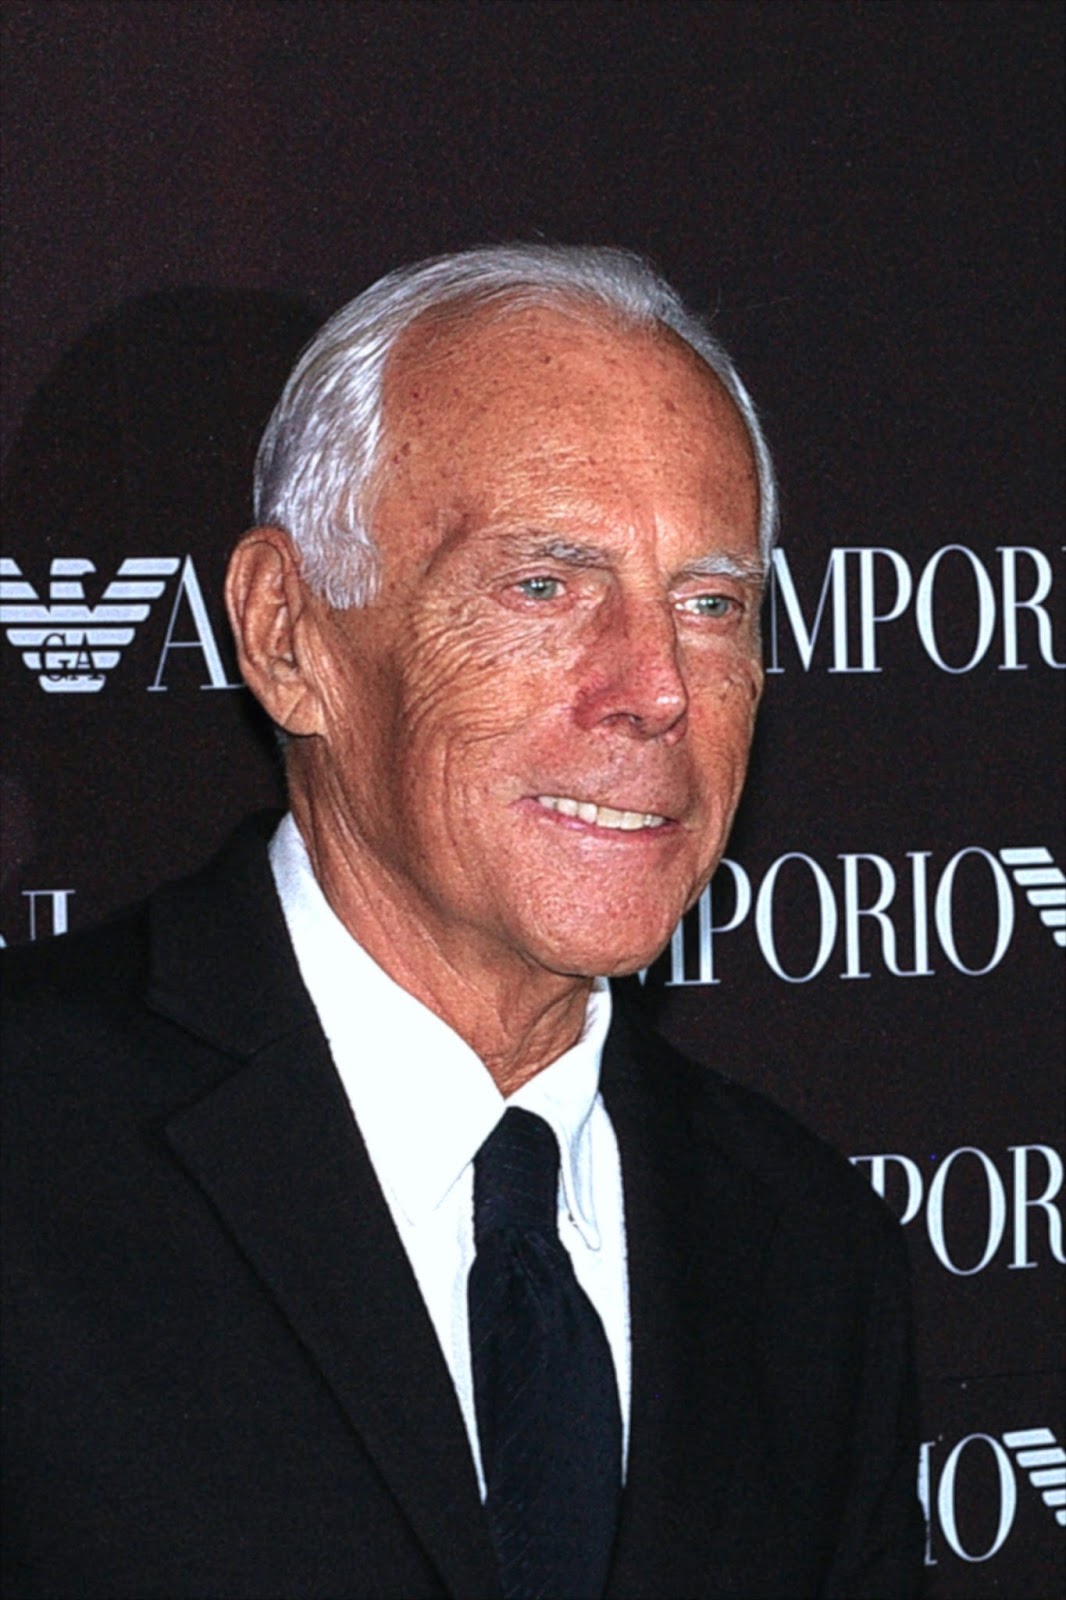 Craziest Top 10 Facts About Giorgio Armani - ListSmashed